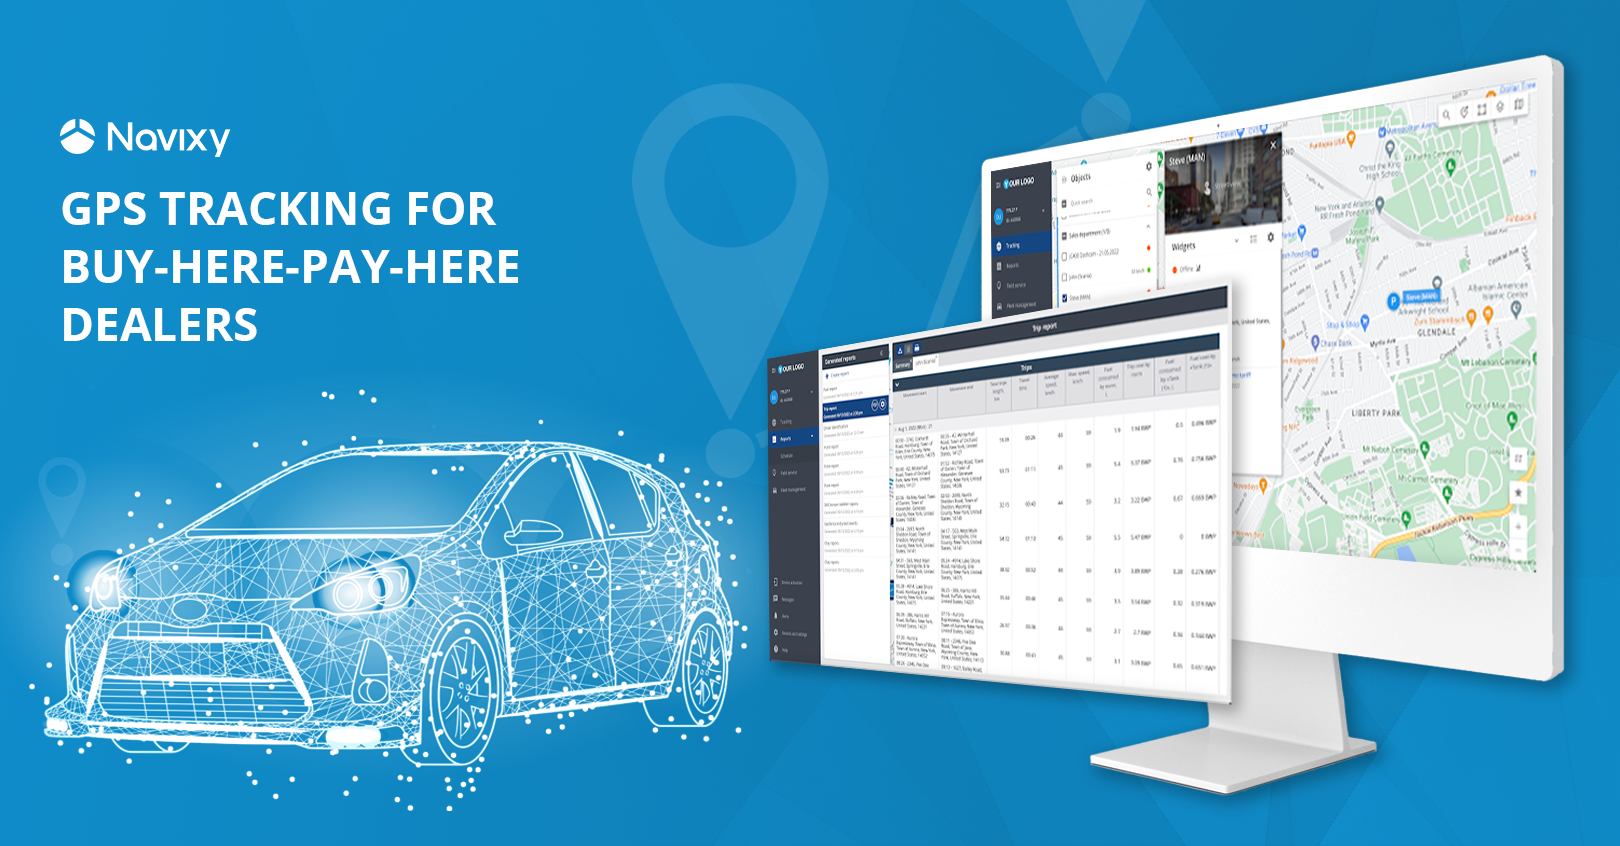 Vehicle location tools for Buy-Here-Pay-Here dealerships